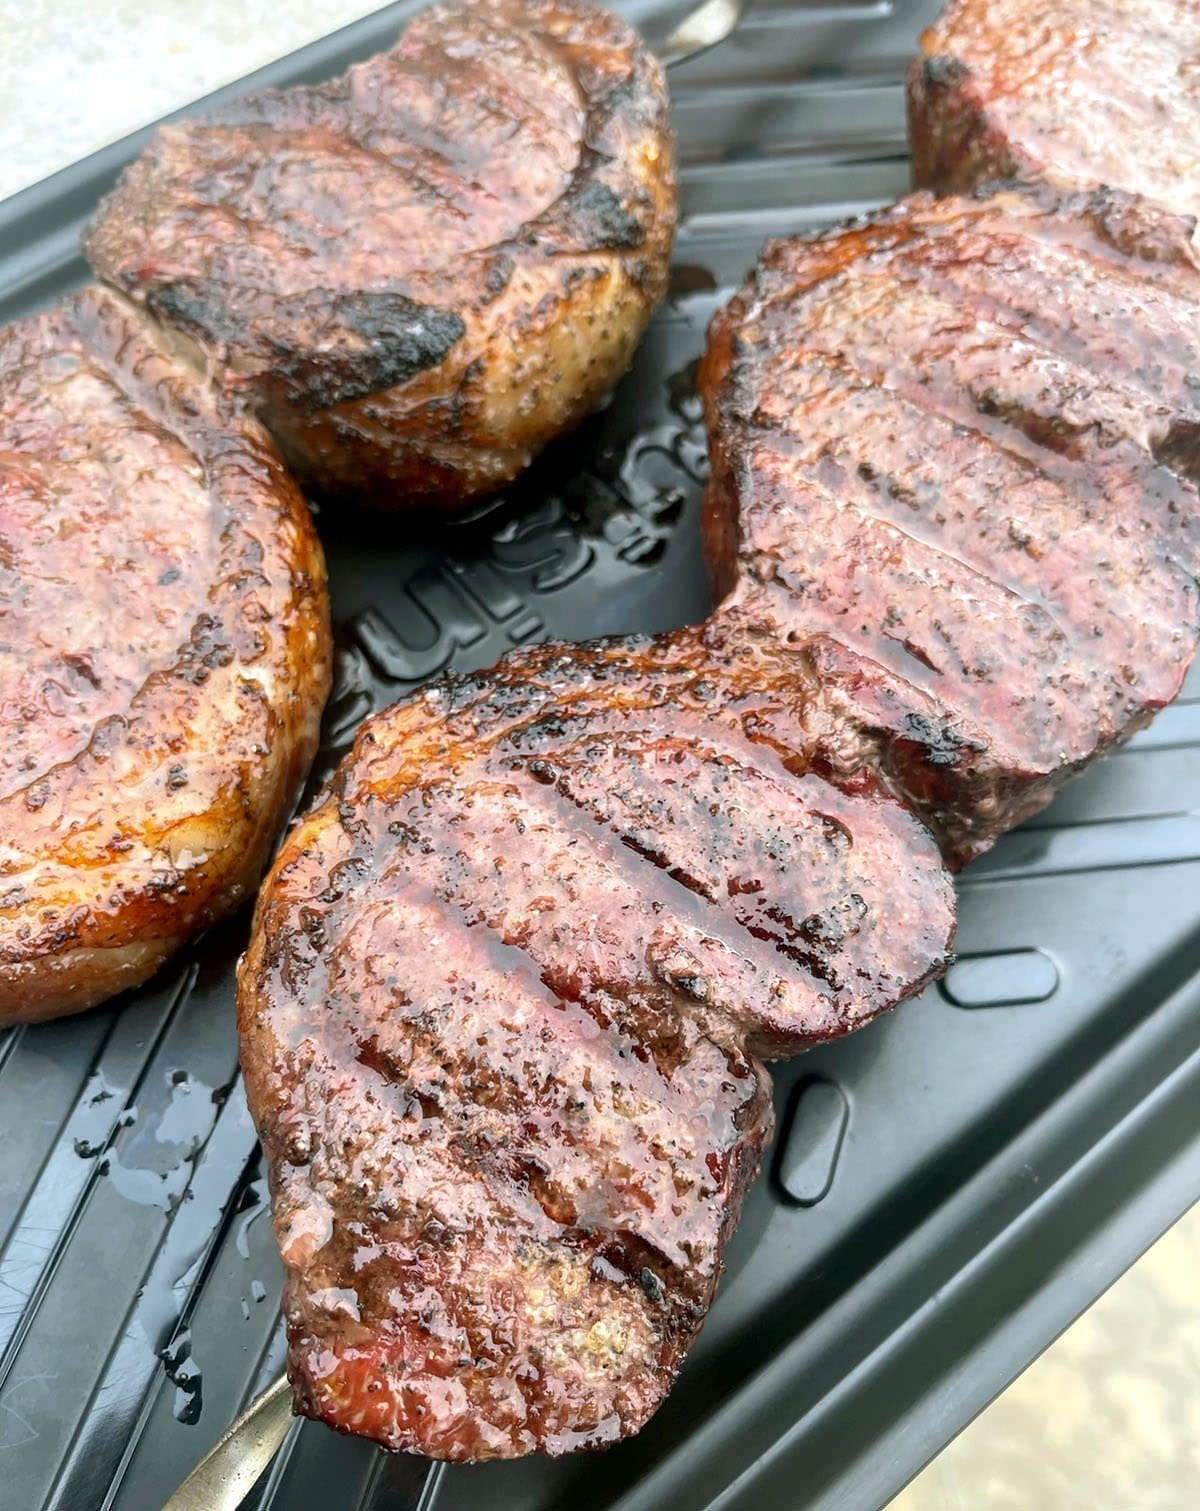 Cooked Picanha steak on a black platter.